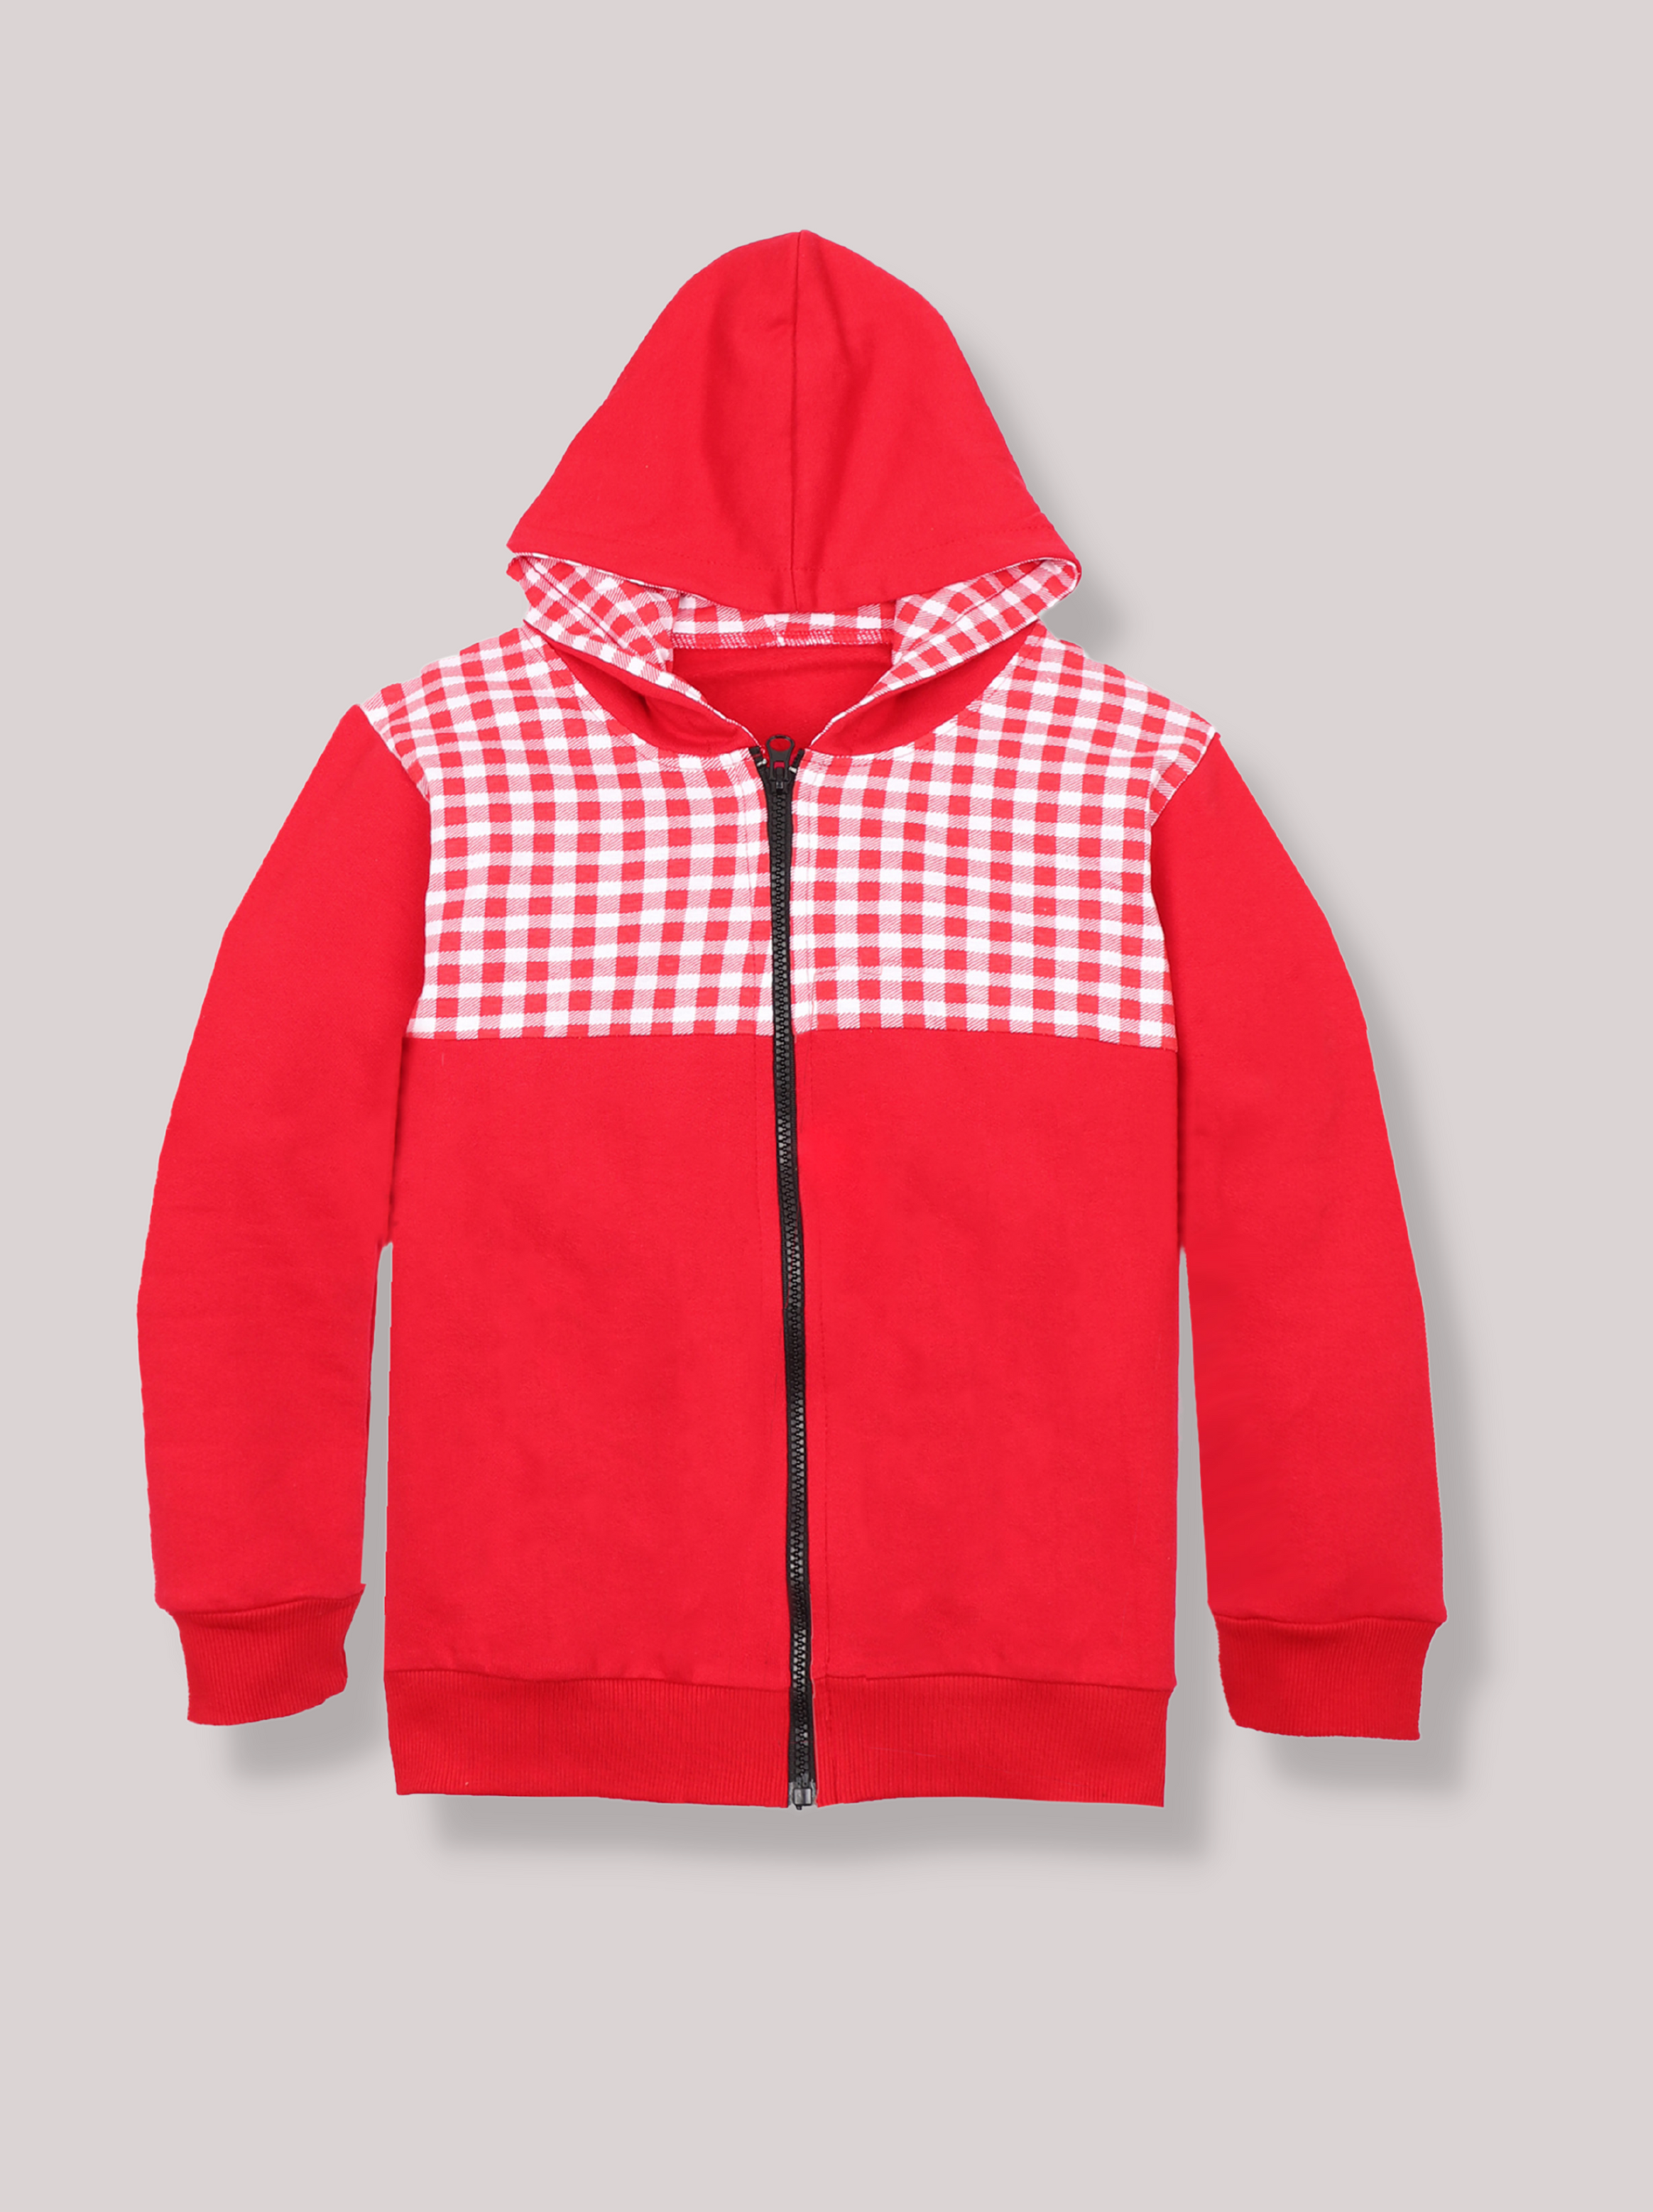 Kids Unisex Red Full Sleeve Chess board Themed Hoodie